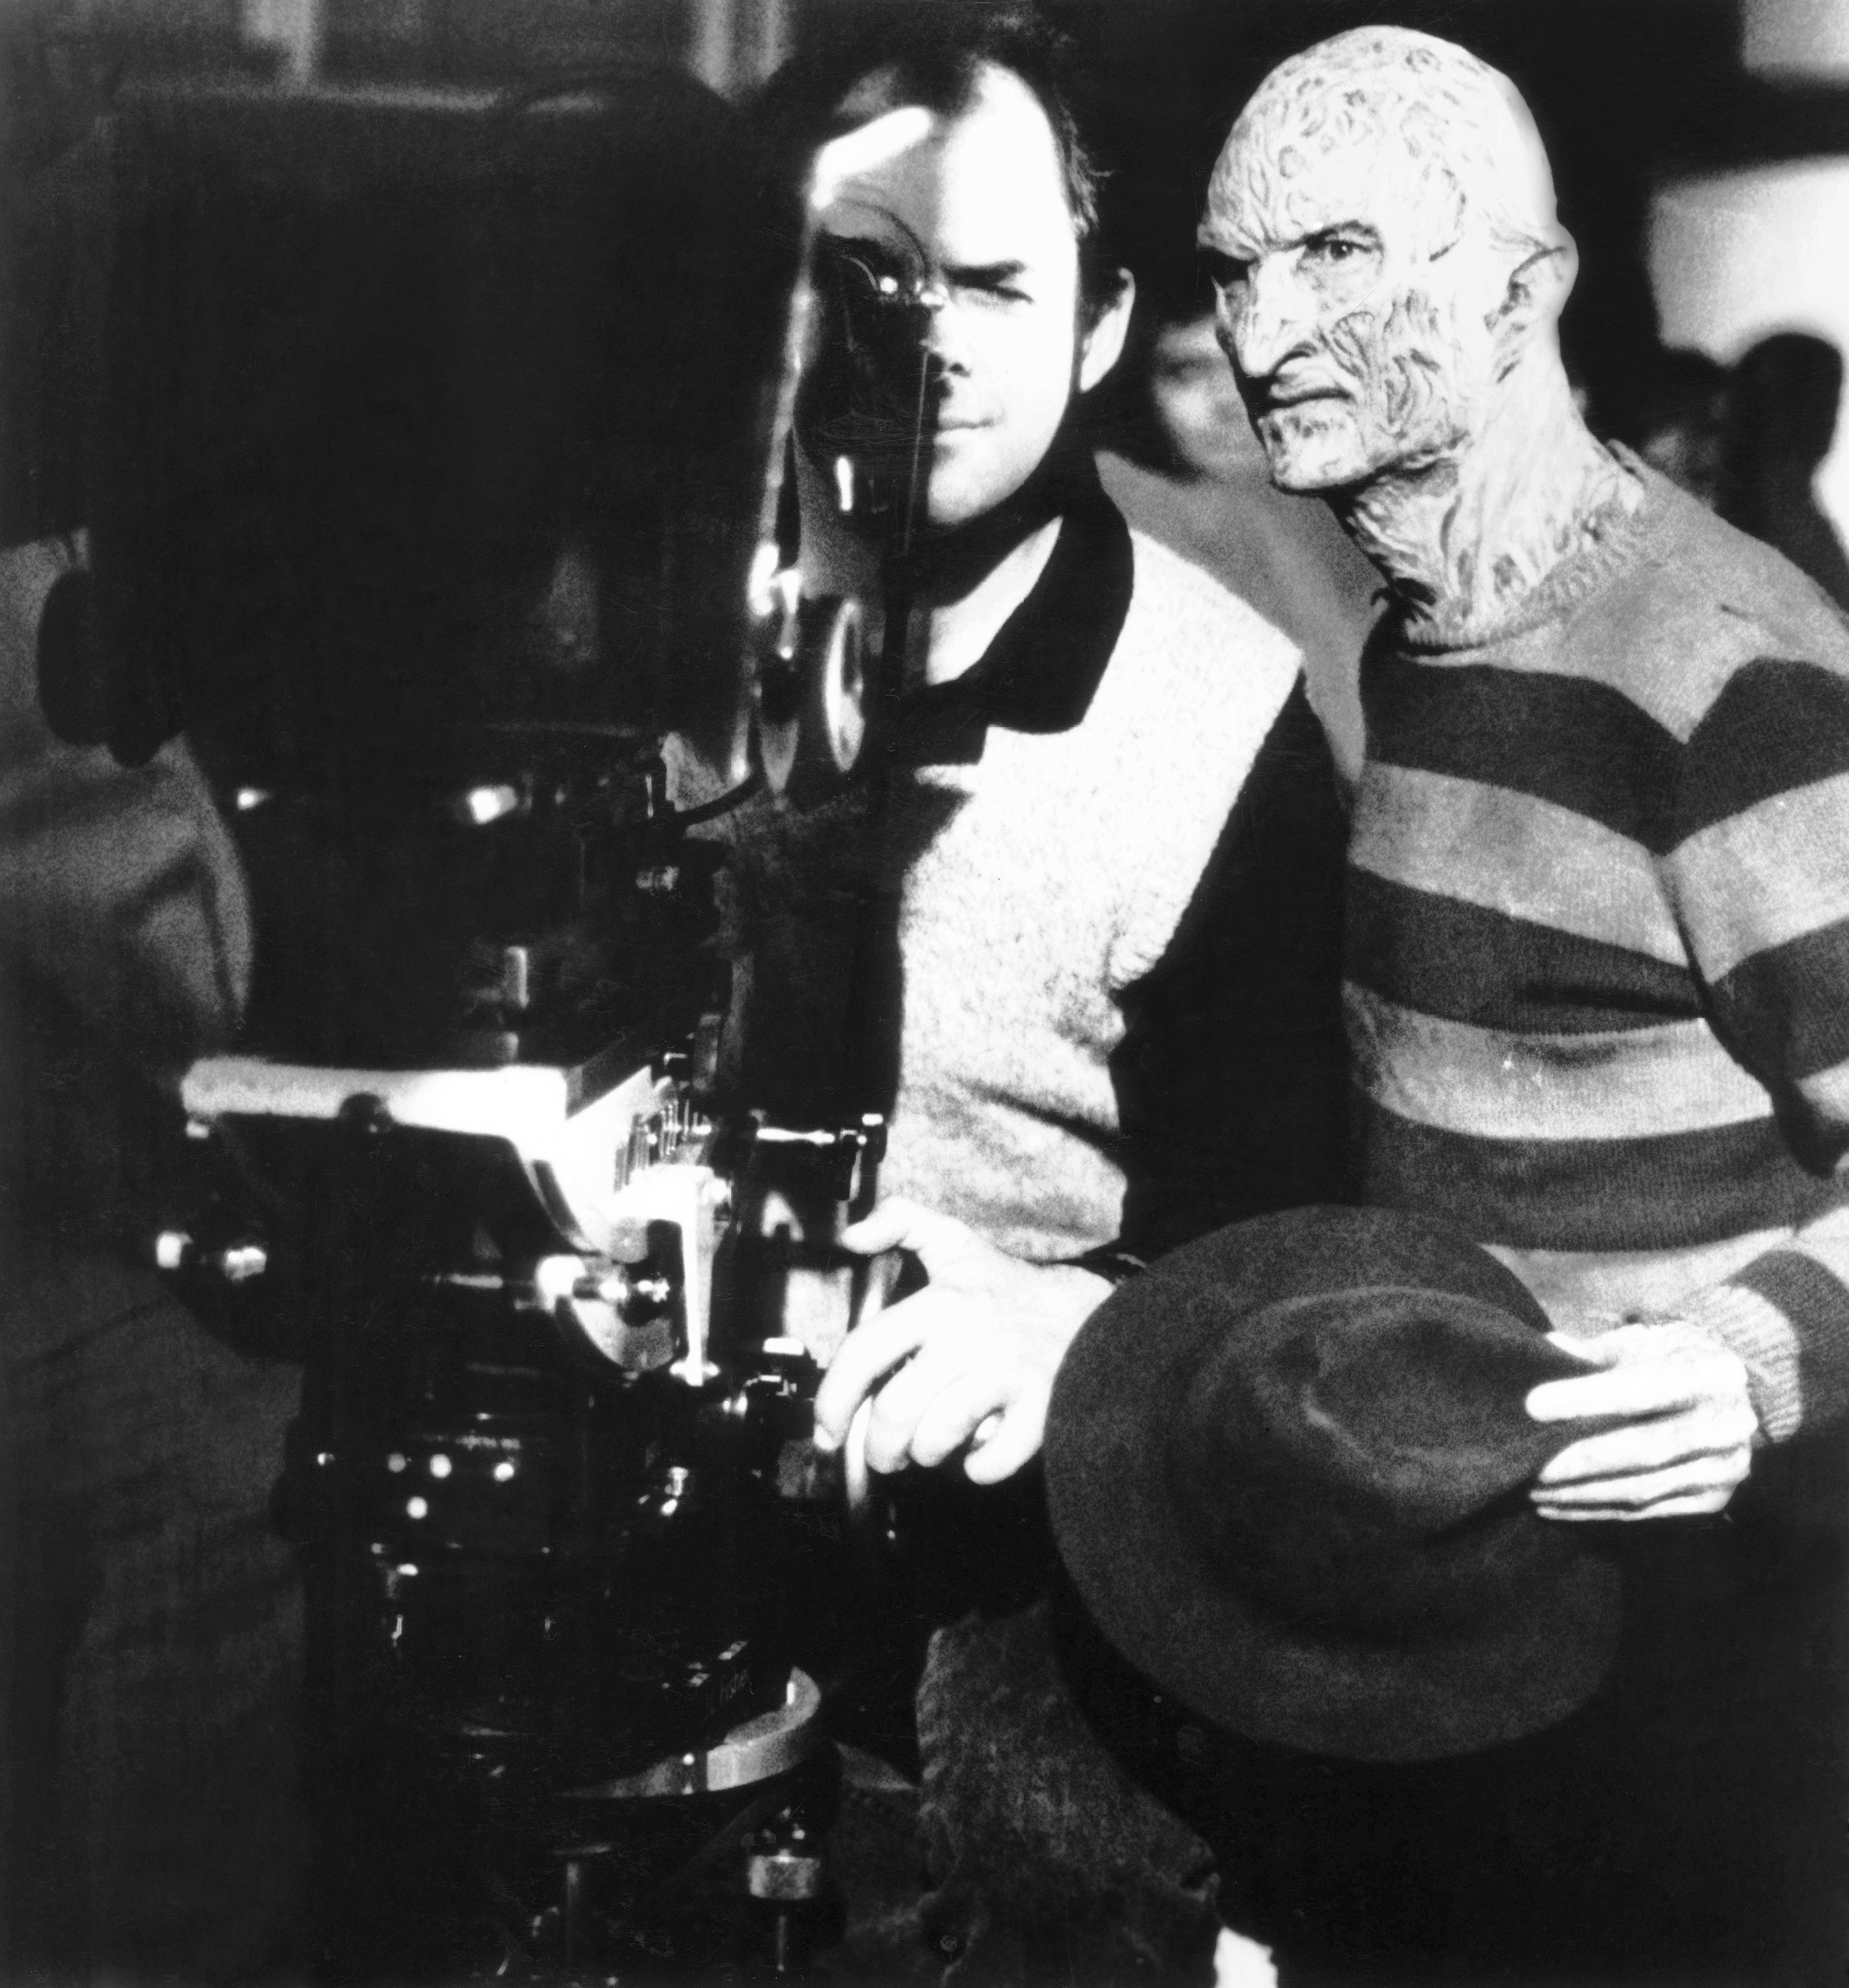 A man in a nightmareish costume stands behind a camera